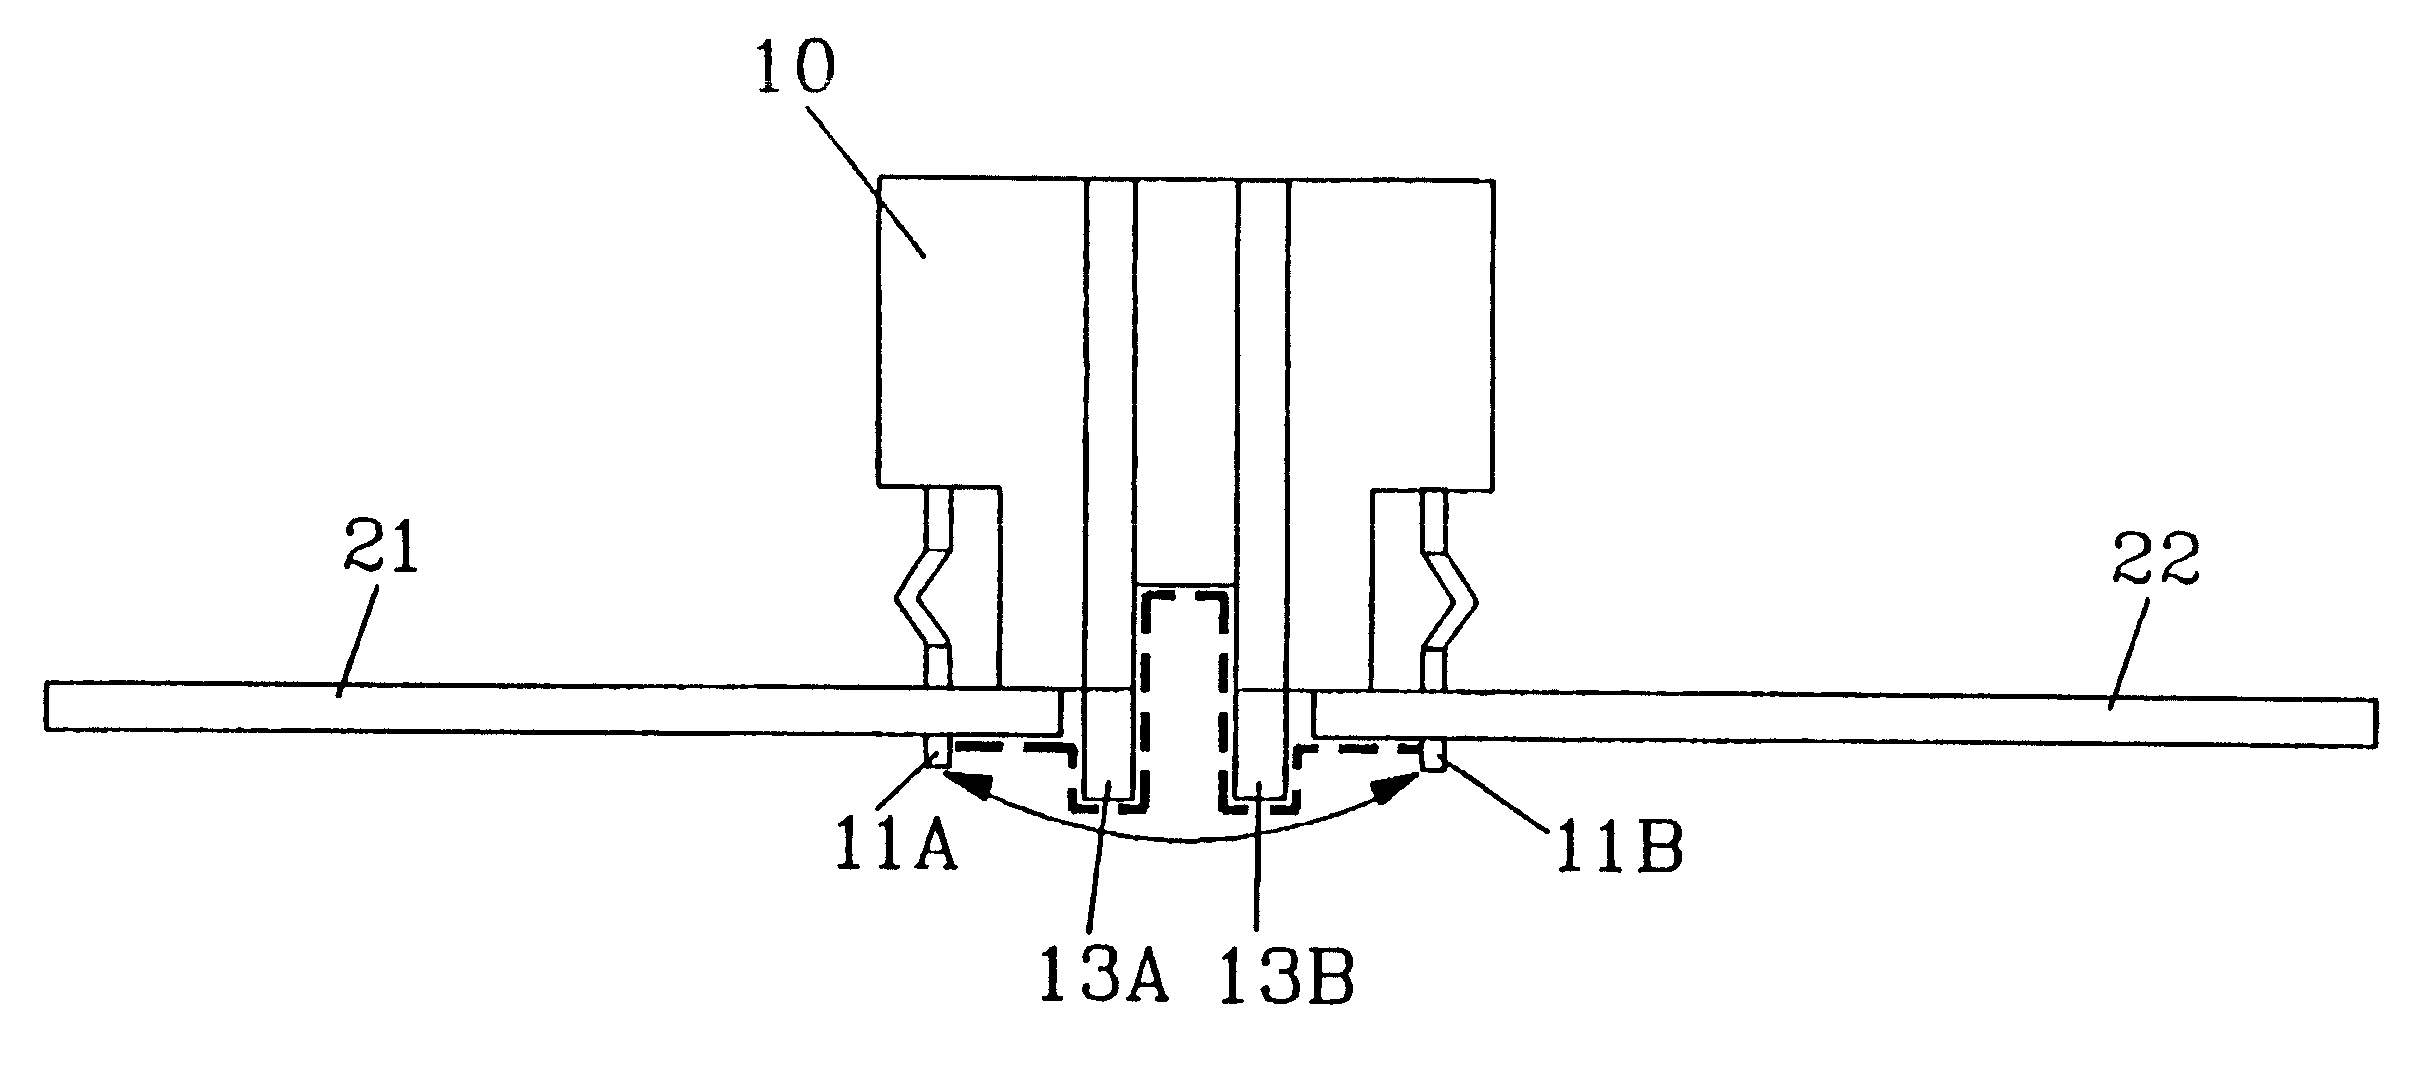 Insulation barrier on a printed circuit board